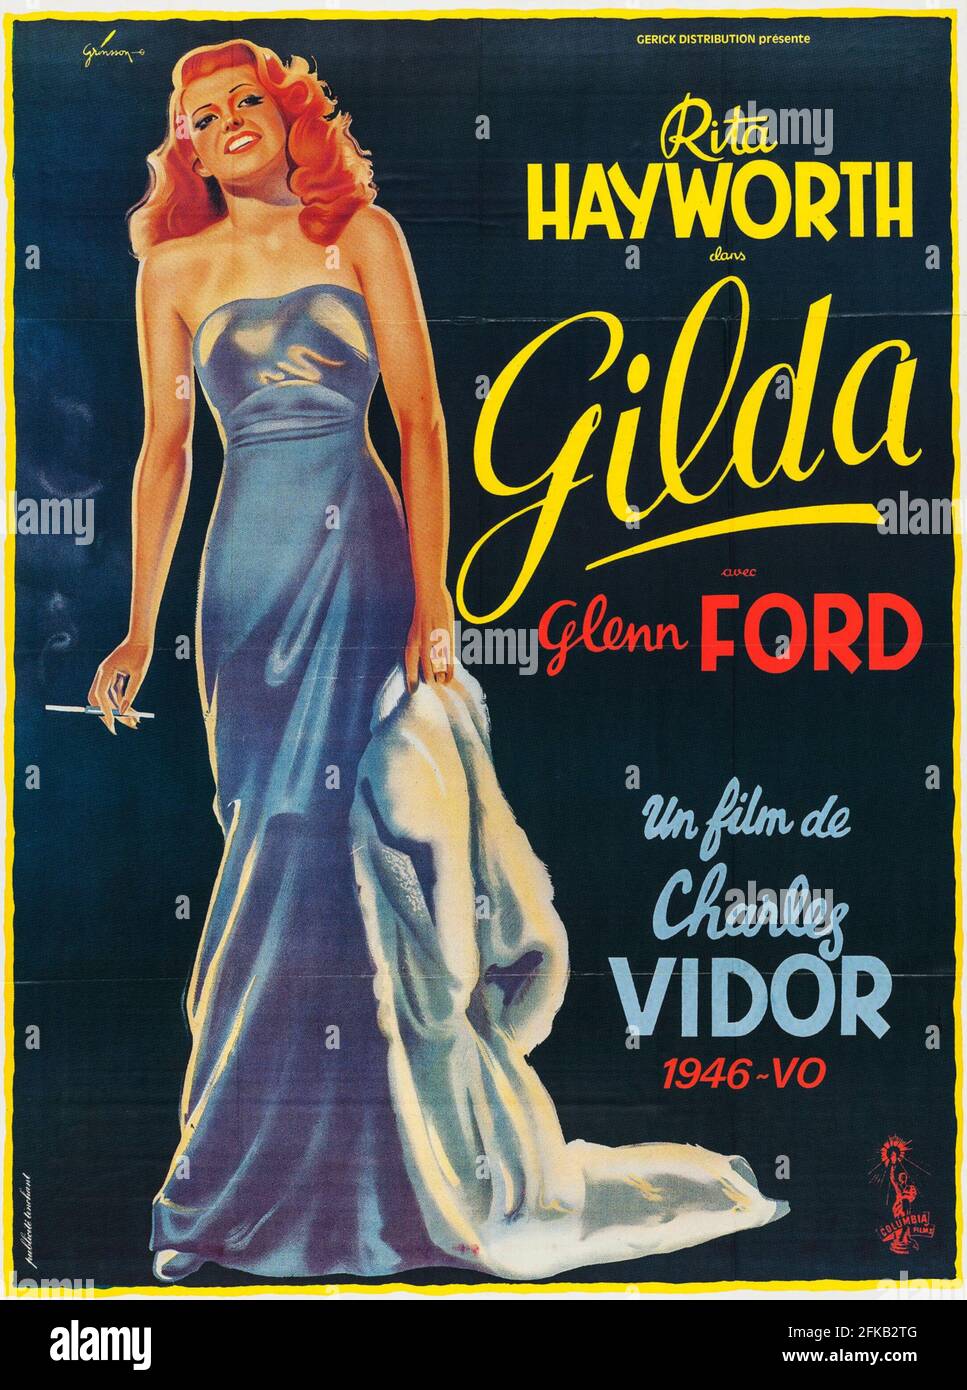 Movie poster: Gilda is a 1946 American film noir directed by Charles Vidor and starring Rita Hayworth in her signature role and Glenn Ford. Stock Photo